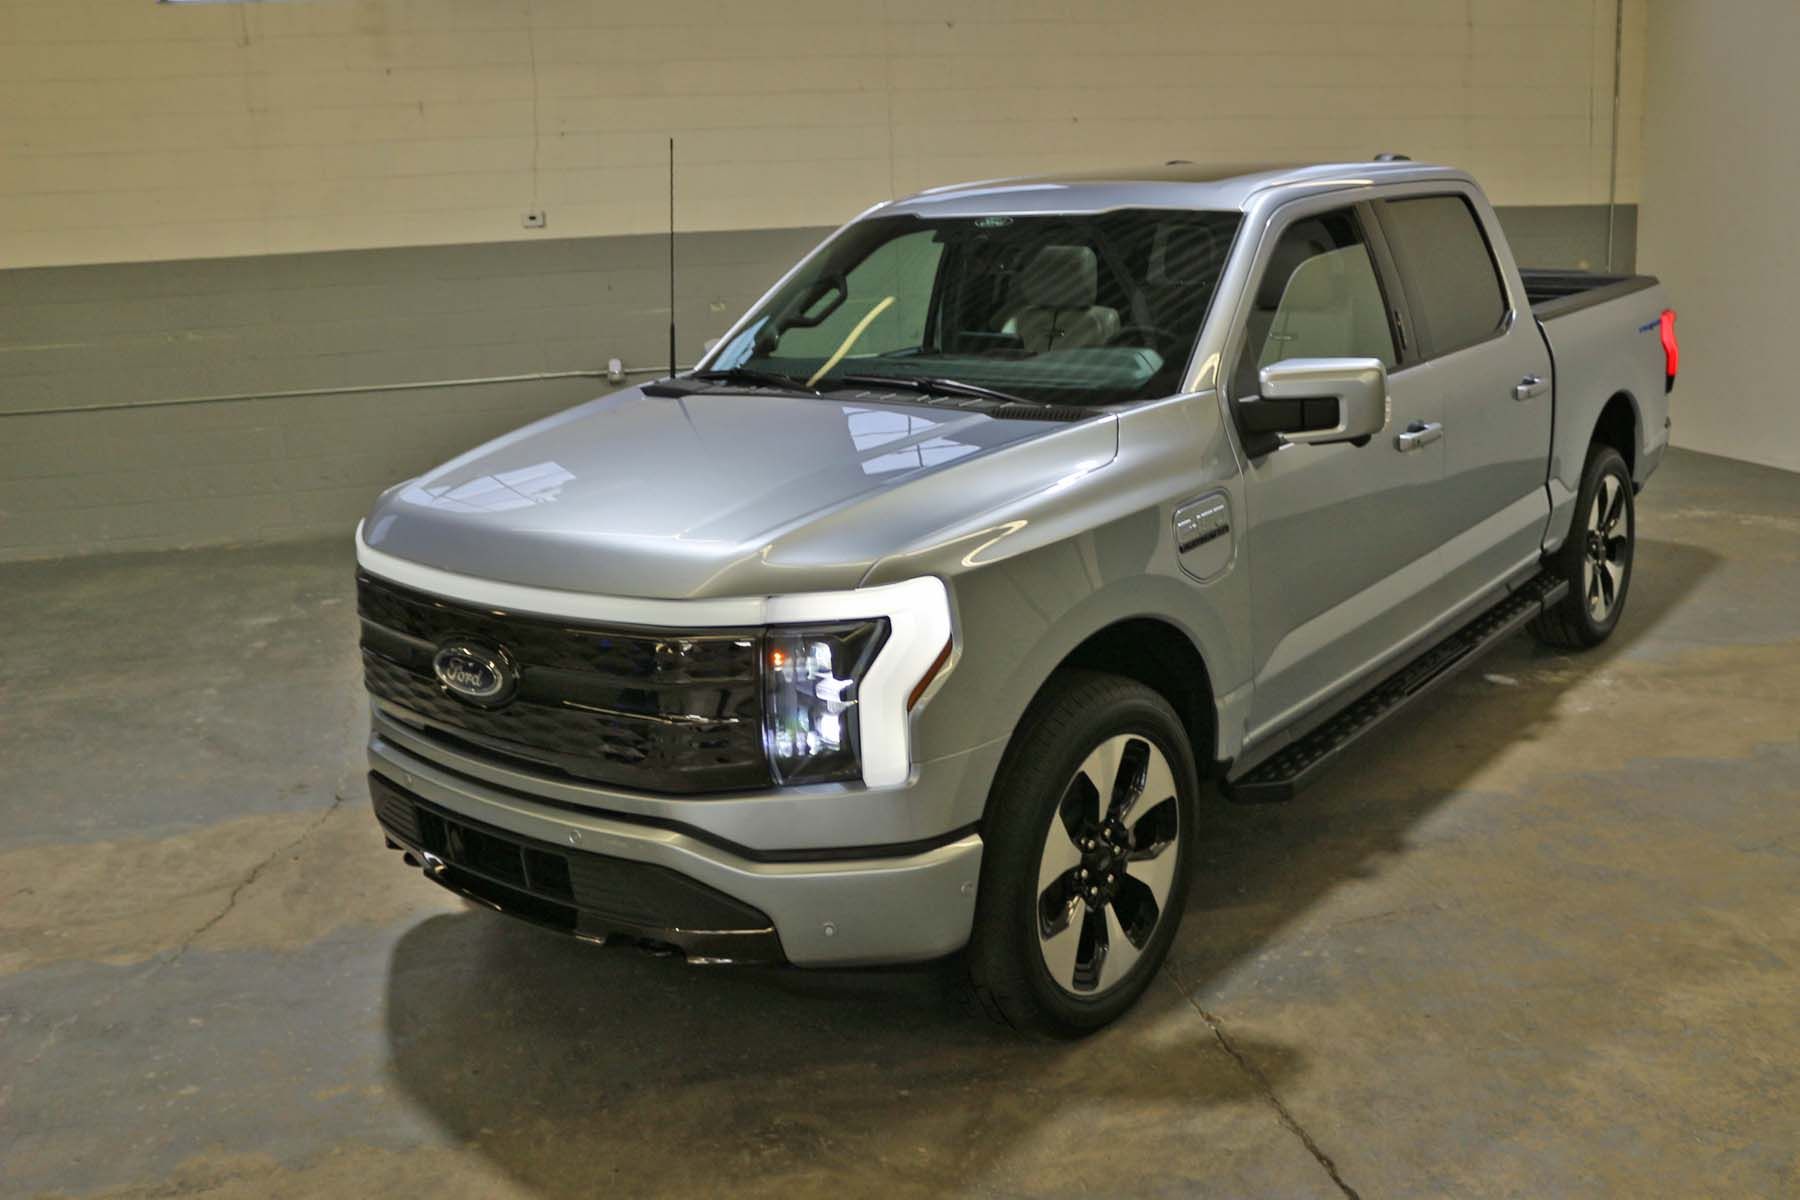 Ford's all-electric F-150 Lightning is a match for go-faster ancestor